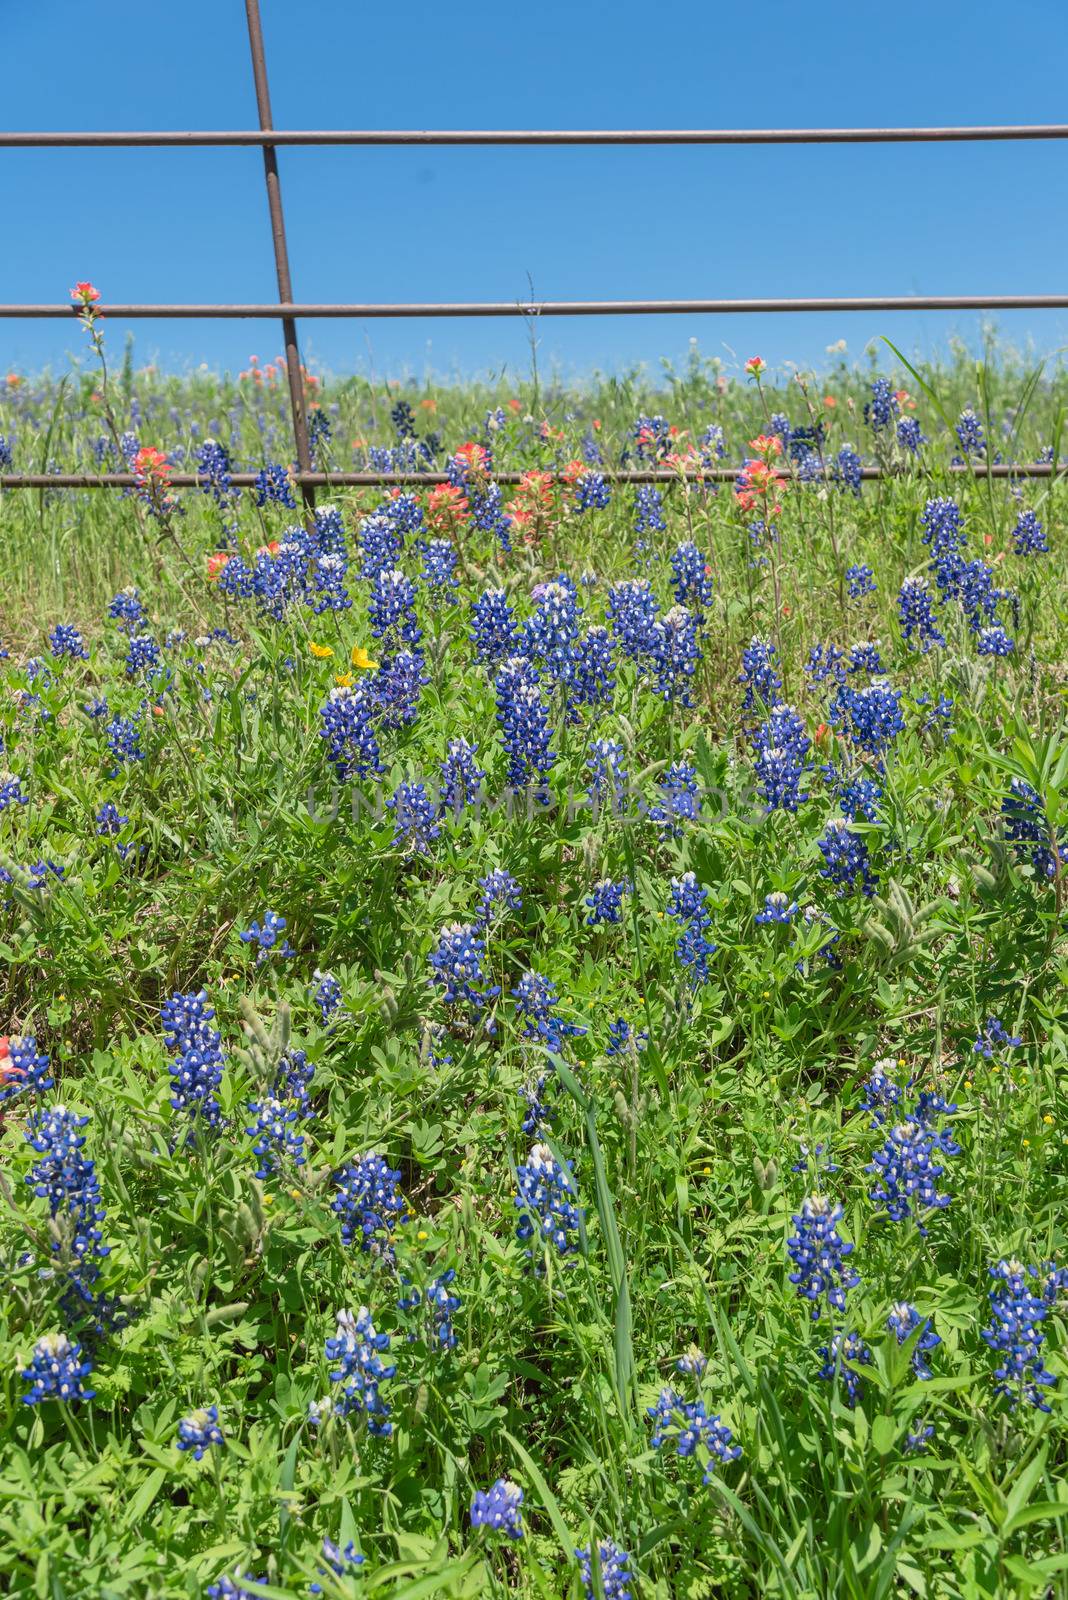 Indian Paintbrush and Bluebonnet blooming along old metal fence by trongnguyen